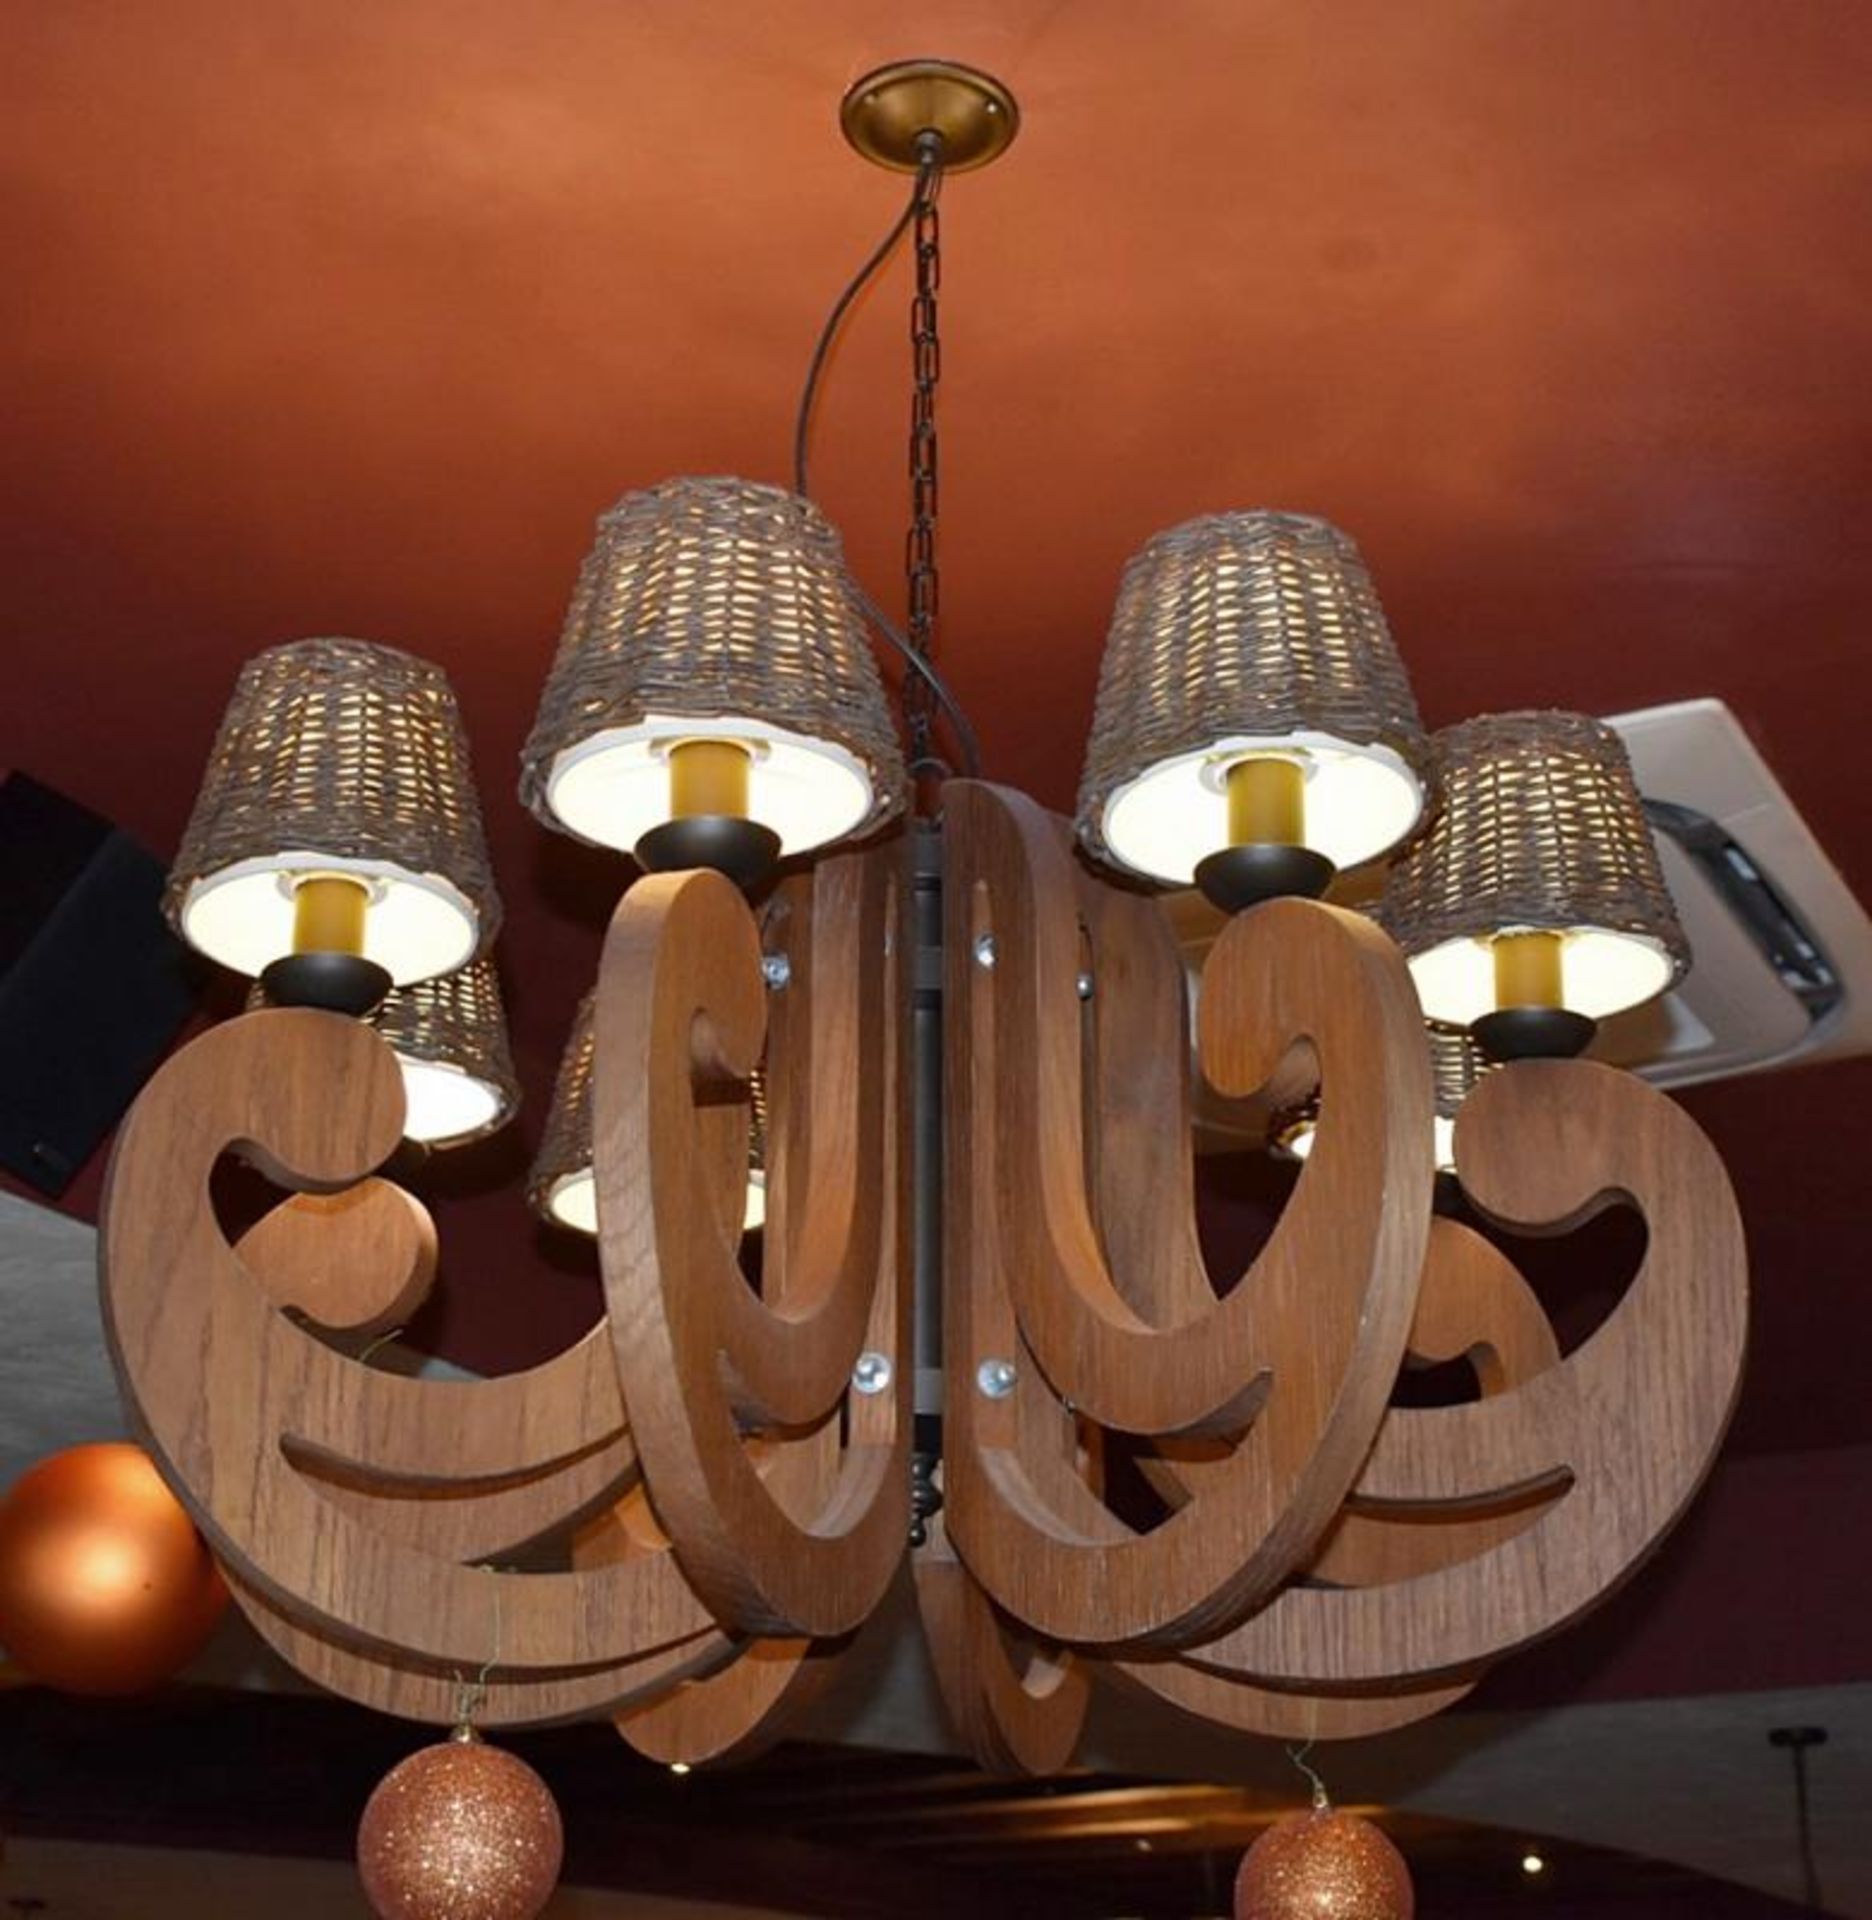 2 x Large Artisan Wooden Candelabra 8 Light Chandeliers - Approx Dimensions: Diameter 90cm - From - Image 4 of 6